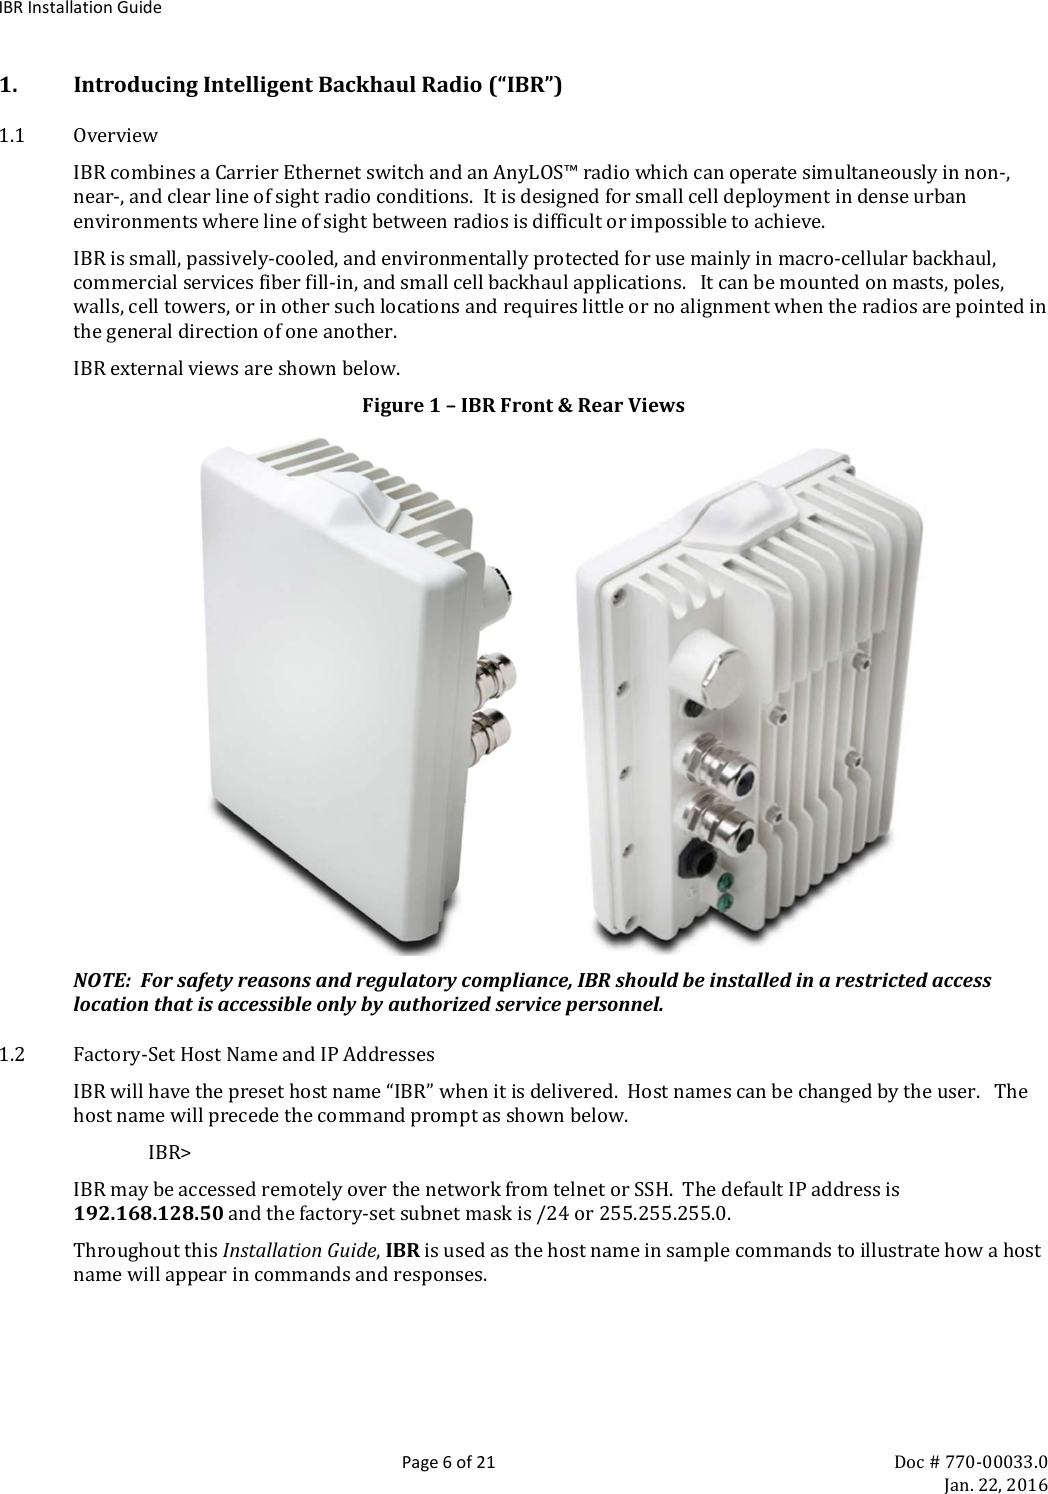 IBR Installation Guide  Page 6 of 21 Doc # 770-00033.0     Jan. 22, 2016 1. Introducing Intelligent Backhaul Radio (“IBR”) 1.1 Overview IBR combines a Carrier Ethernet switch and an AnyLOS™ radio which can operate simultaneously in non-, near-, and clear line of sight radio conditions.  It is designed for small cell deployment in dense urban environments where line of sight between radios is difficult or impossible to achieve.   IBR is small, passively-cooled, and environmentally protected for use mainly in macro-cellular backhaul, commercial services fiber fill-in, and small cell backhaul applications.   It can be mounted on masts, poles, walls, cell towers, or in other such locations and requires little or no alignment when the radios are pointed in the general direction of one another. IBR external views are shown below. Figure 1 – IBR Front &amp; Rear Views          NOTE:  For safety reasons and regulatory compliance, IBR should be installed in a restricted access location that is accessible only by authorized service personnel. 1.2 Factory-Set Host Name and IP Addresses IBR will have the preset host name “IBR” when it is delivered.  Host names can be changed by the user.   The host name will precede the command prompt as shown below. IBR&gt;  IBR may be accessed remotely over the network from telnet or SSH.  The default IP address is 192.168.128.50 and the factory-set subnet mask is /24 or 255.255.255.0. Throughout this Installation Guide, IBR is used as the host name in sample commands to illustrate how a host name will appear in commands and responses. 